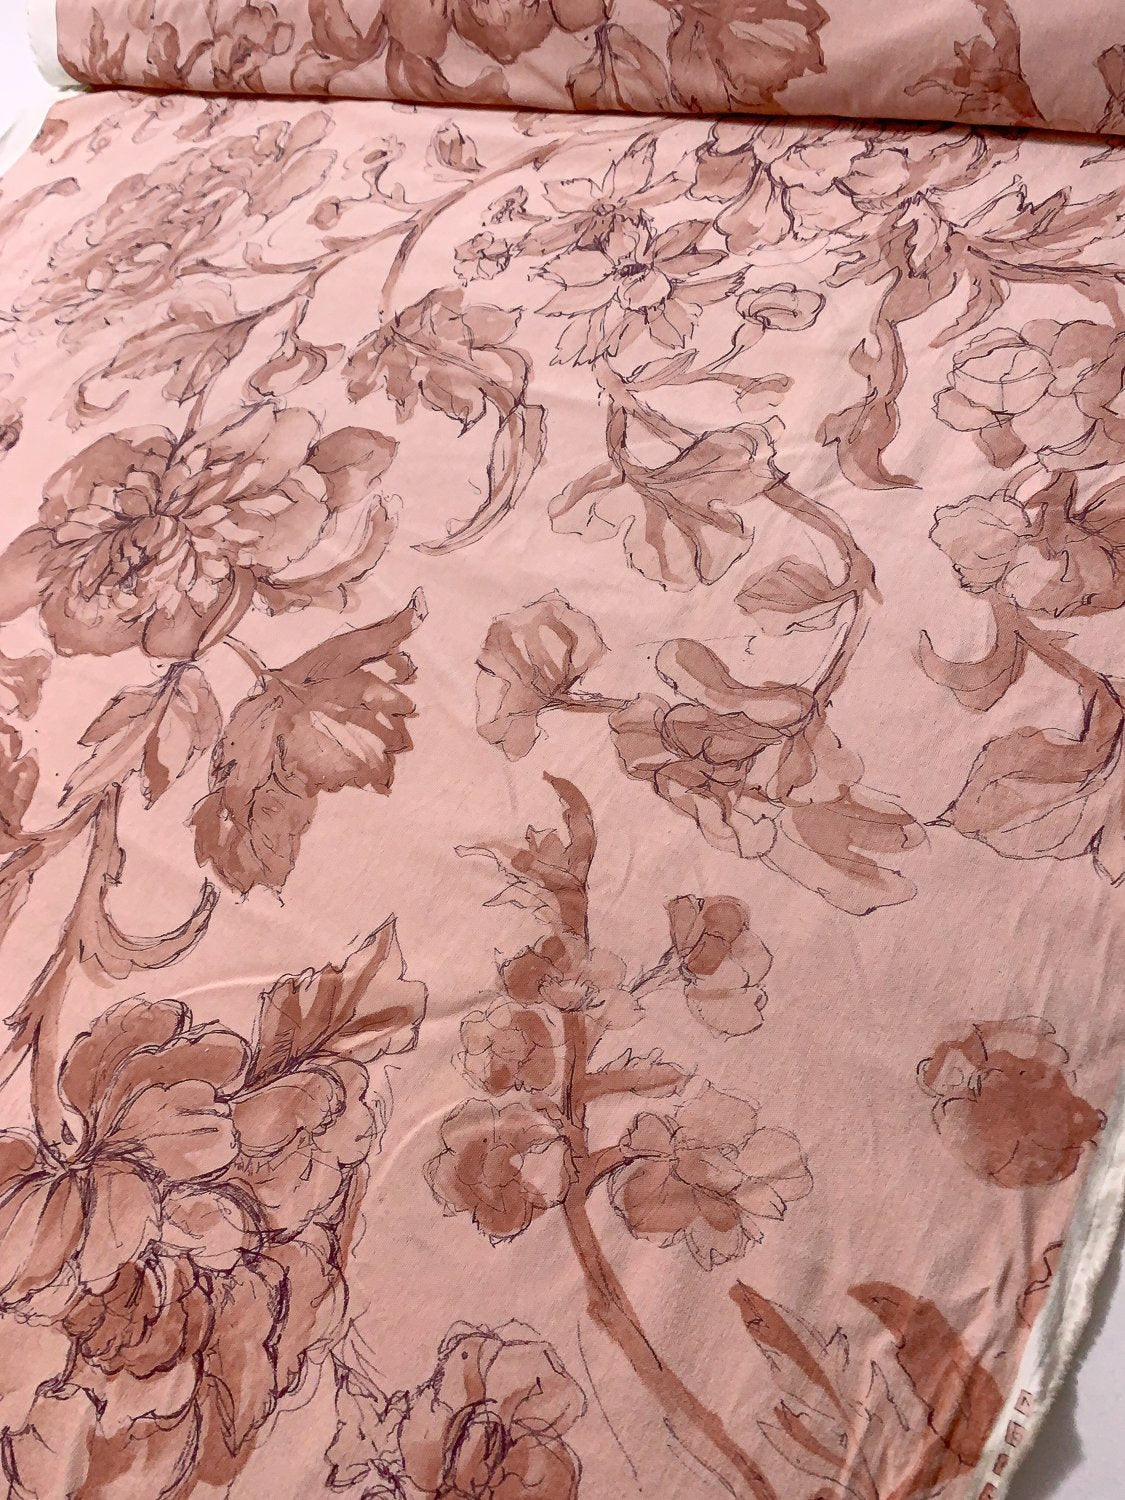 Watercolor Floral Printed Stretch Corduroy Velveteen - Light Pink / Dusty Rose / Purple